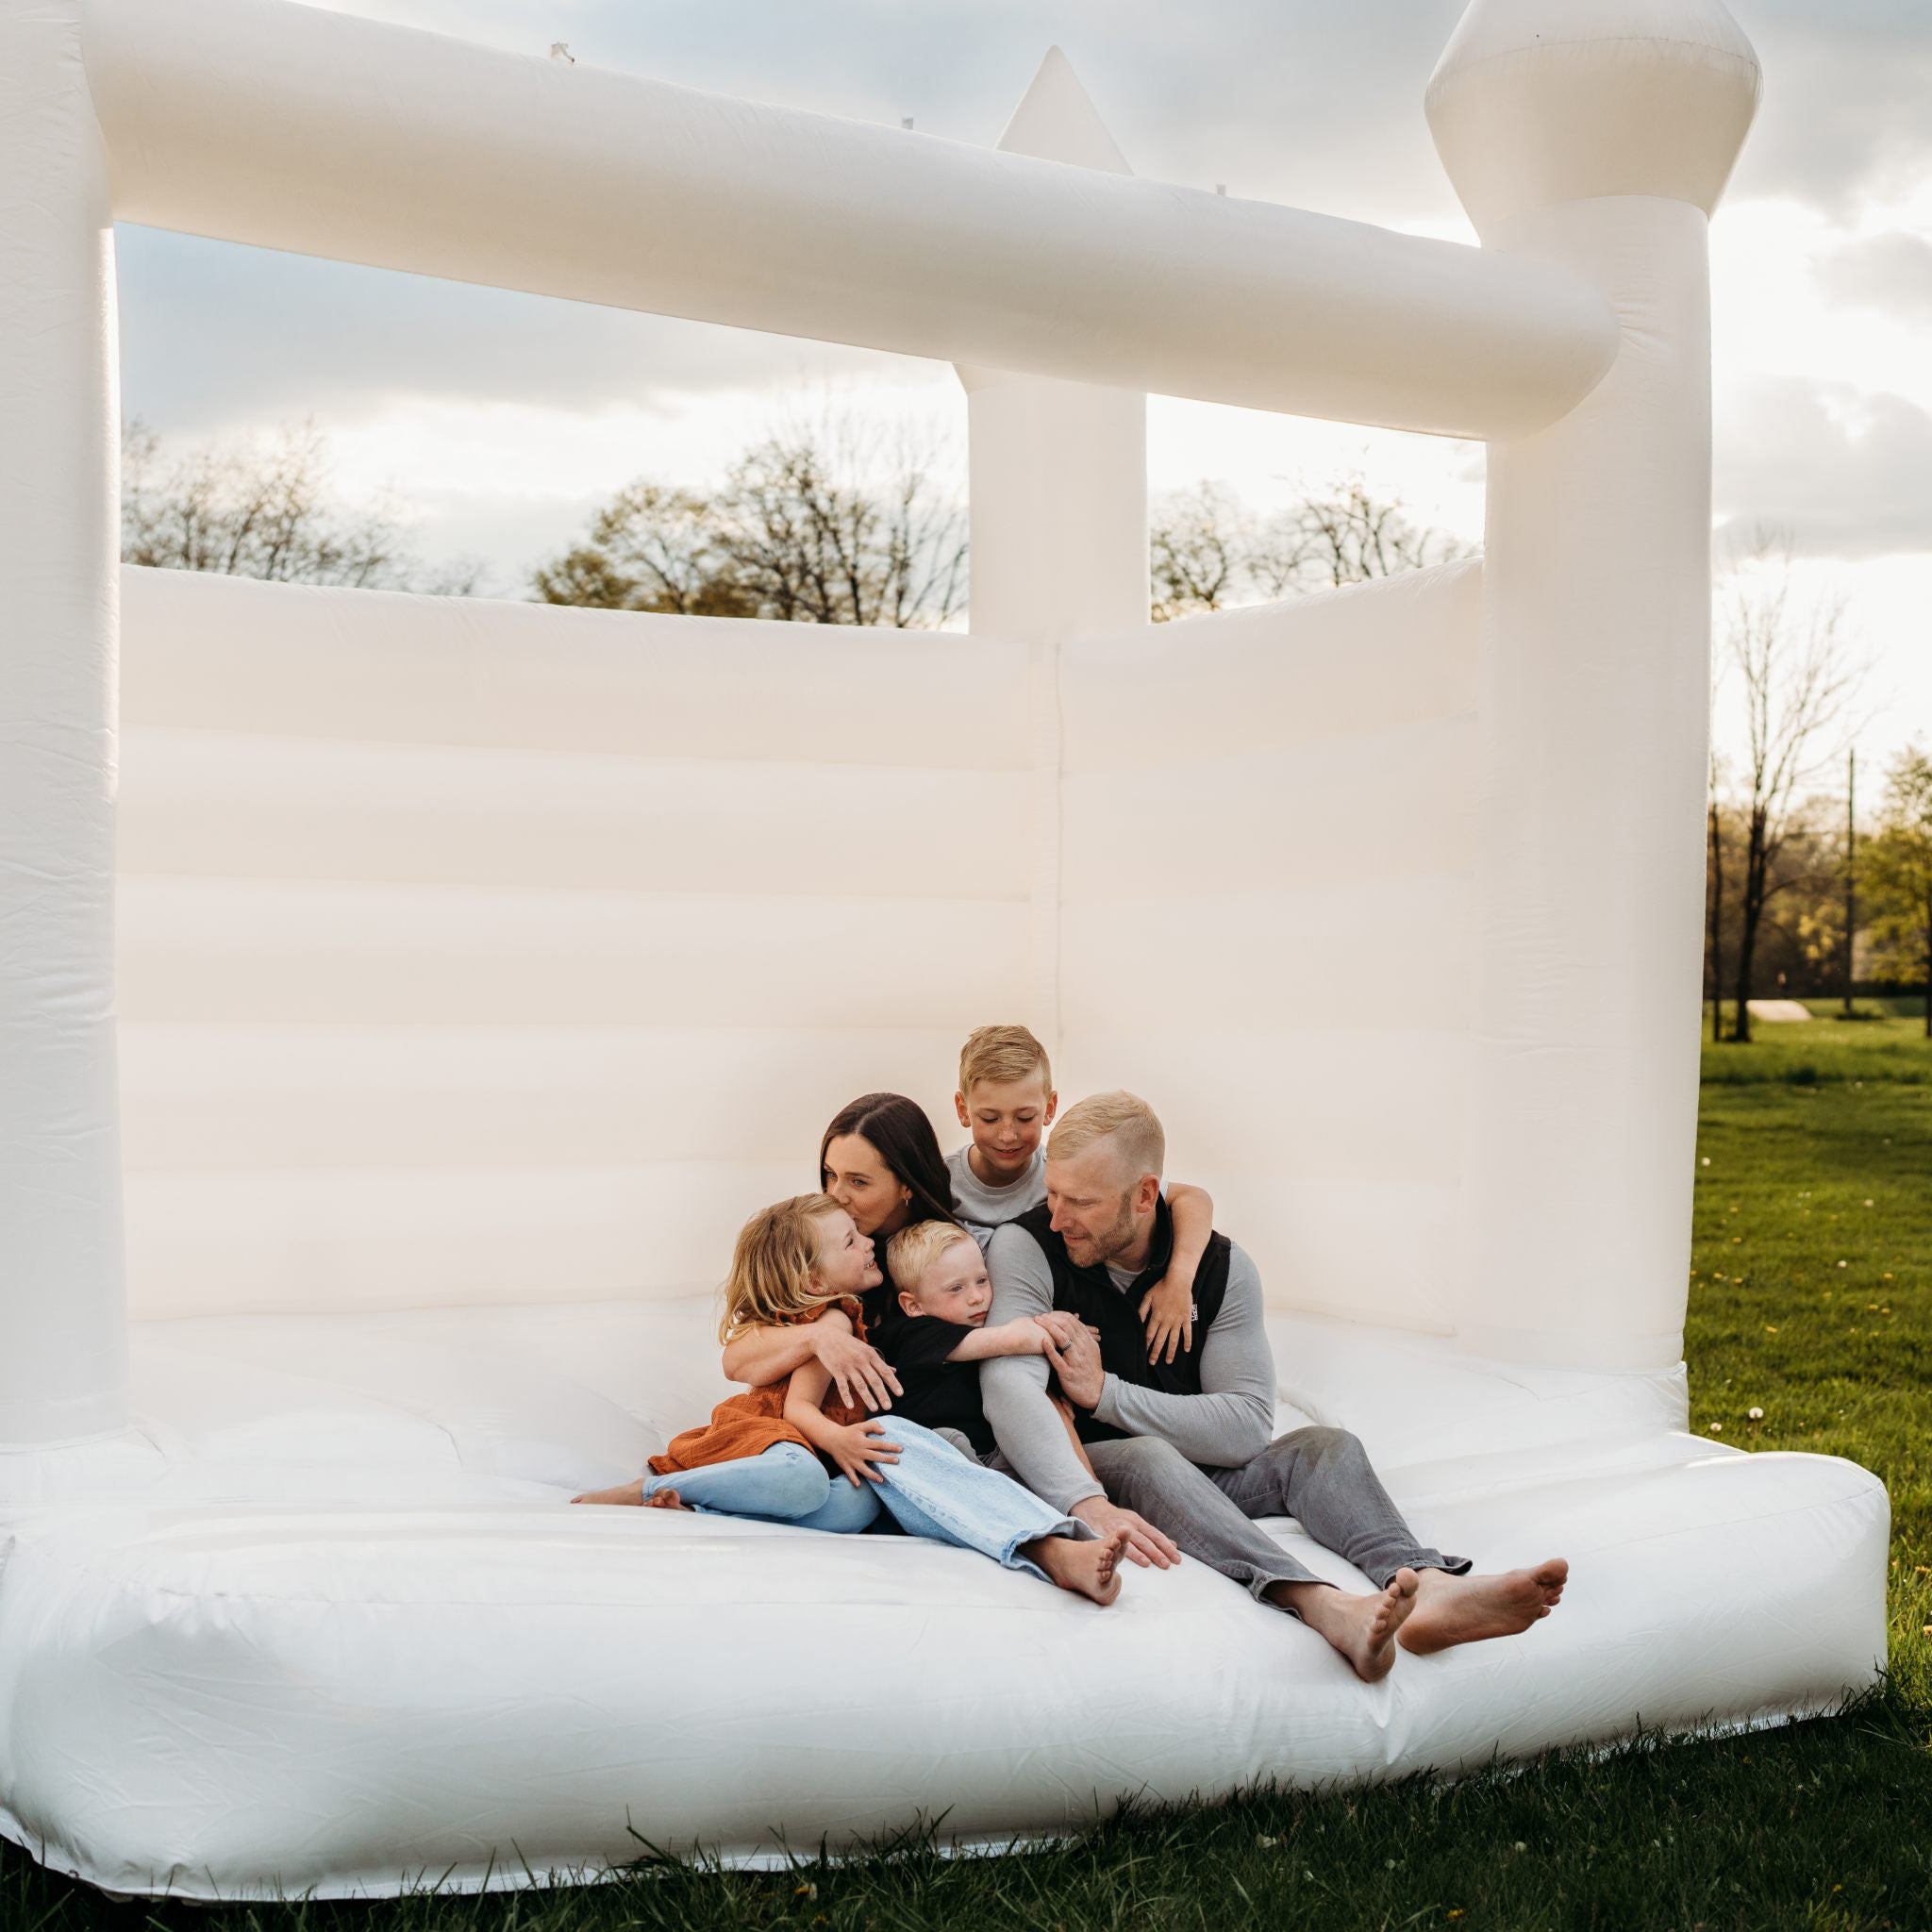 outdoor photo of Classic Bounce owners and children sitting in a bounce house.